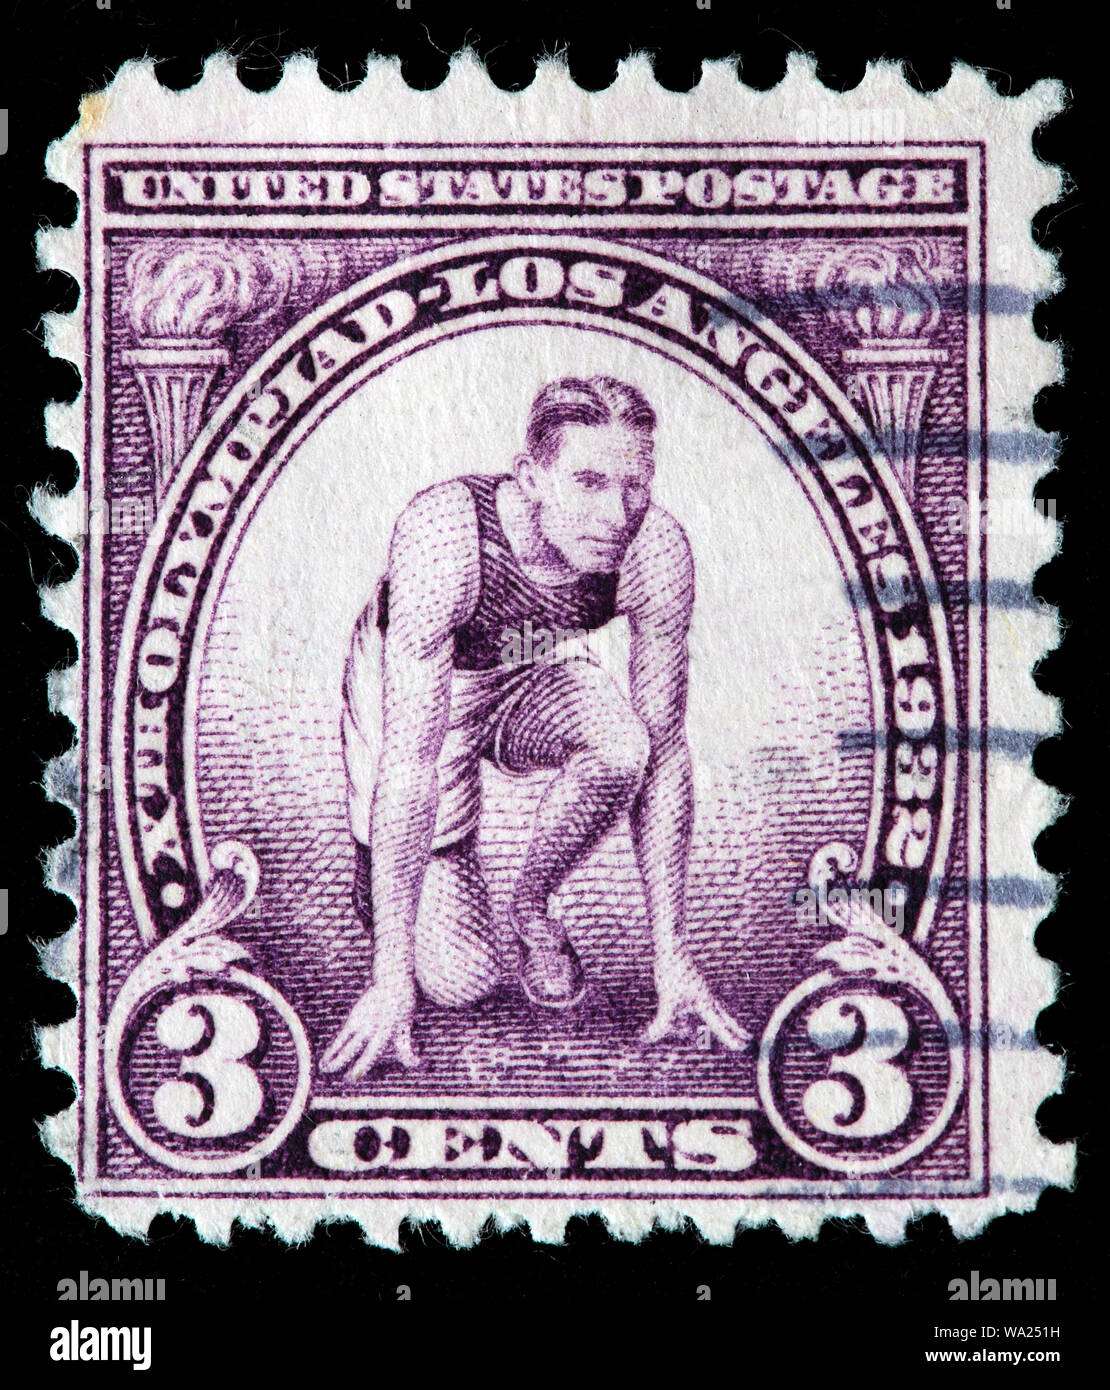 Runner at Starting Mark, Summer Olympics 1932, Los Angeles, postage stamp, USA, 1932